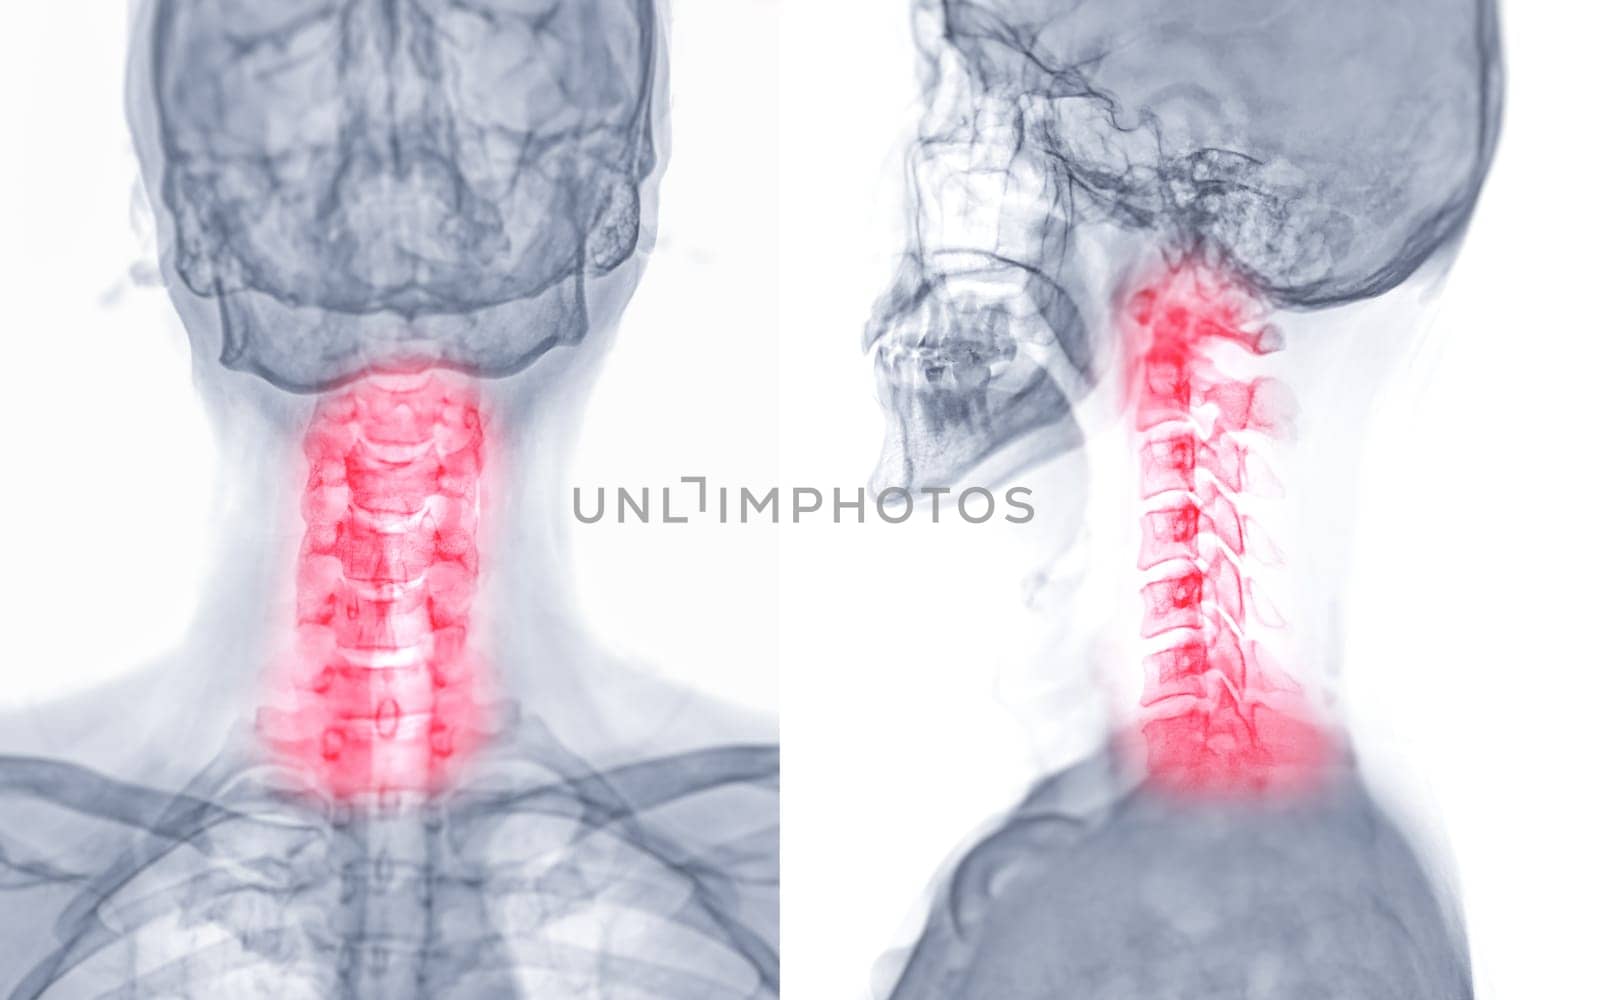 X-ray C-spine or x-ray image of Cervical spine AP and Lateral view for diagnostic intervertebral disc herniation ,Spondylosis and fracture. by samunella